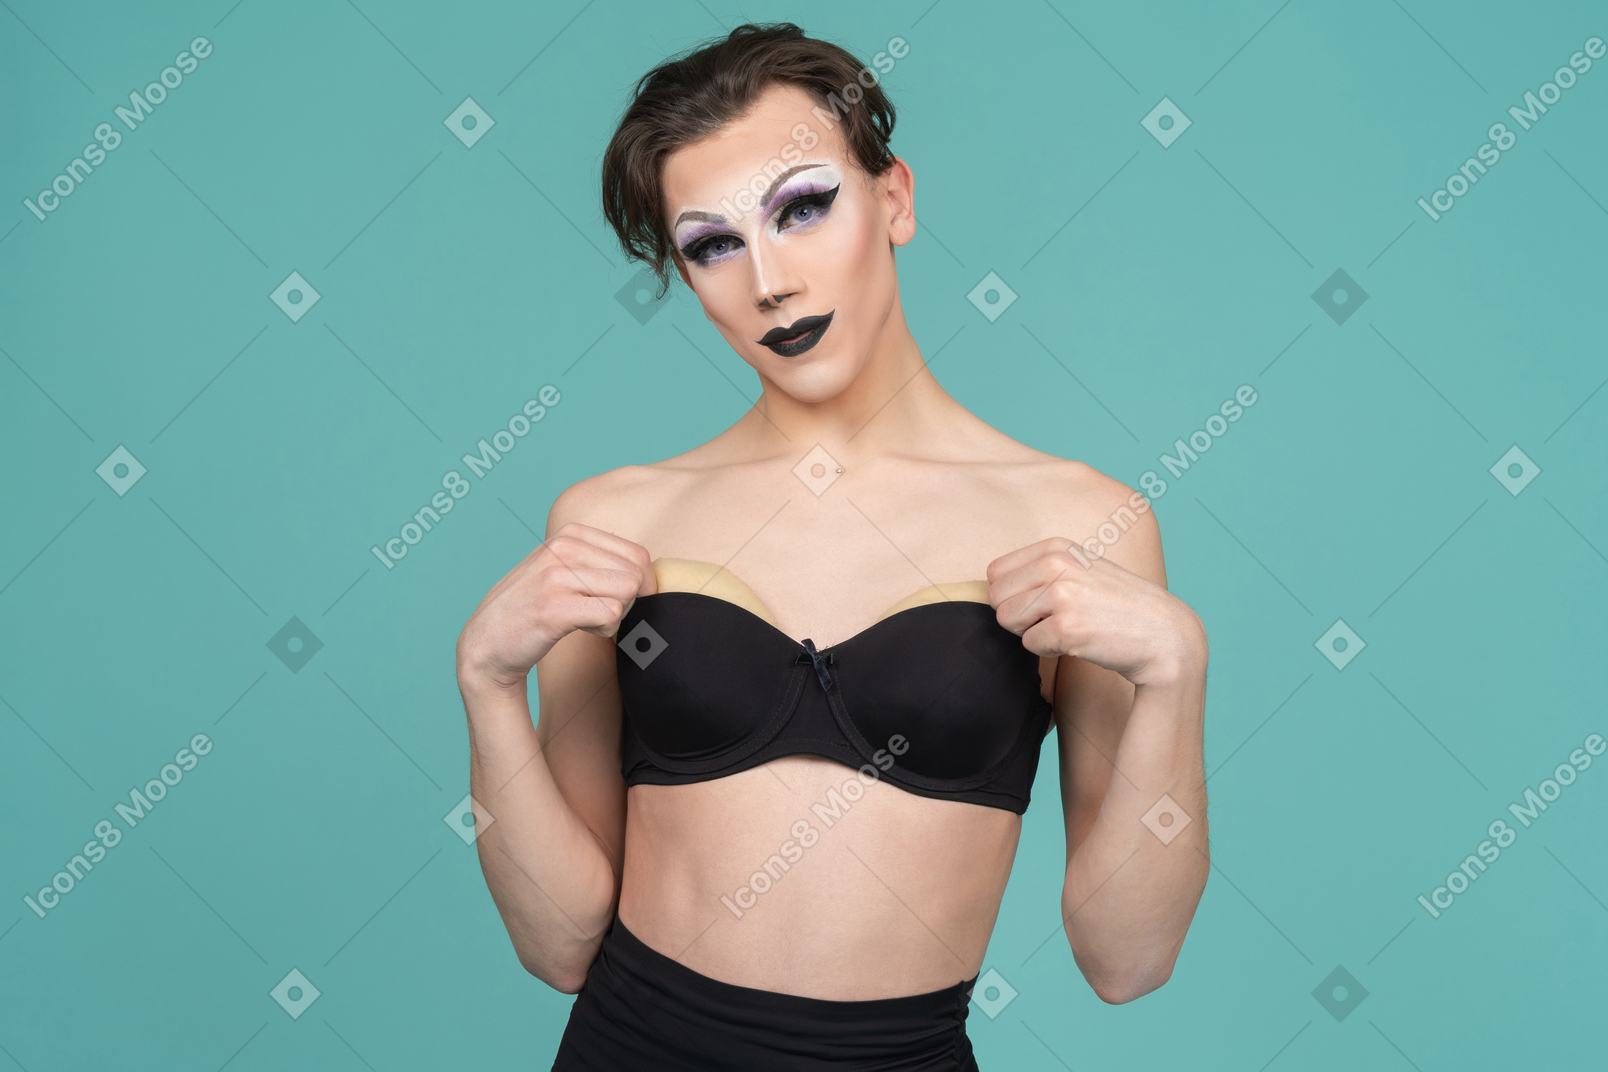 Drag queen taking padding out of bra